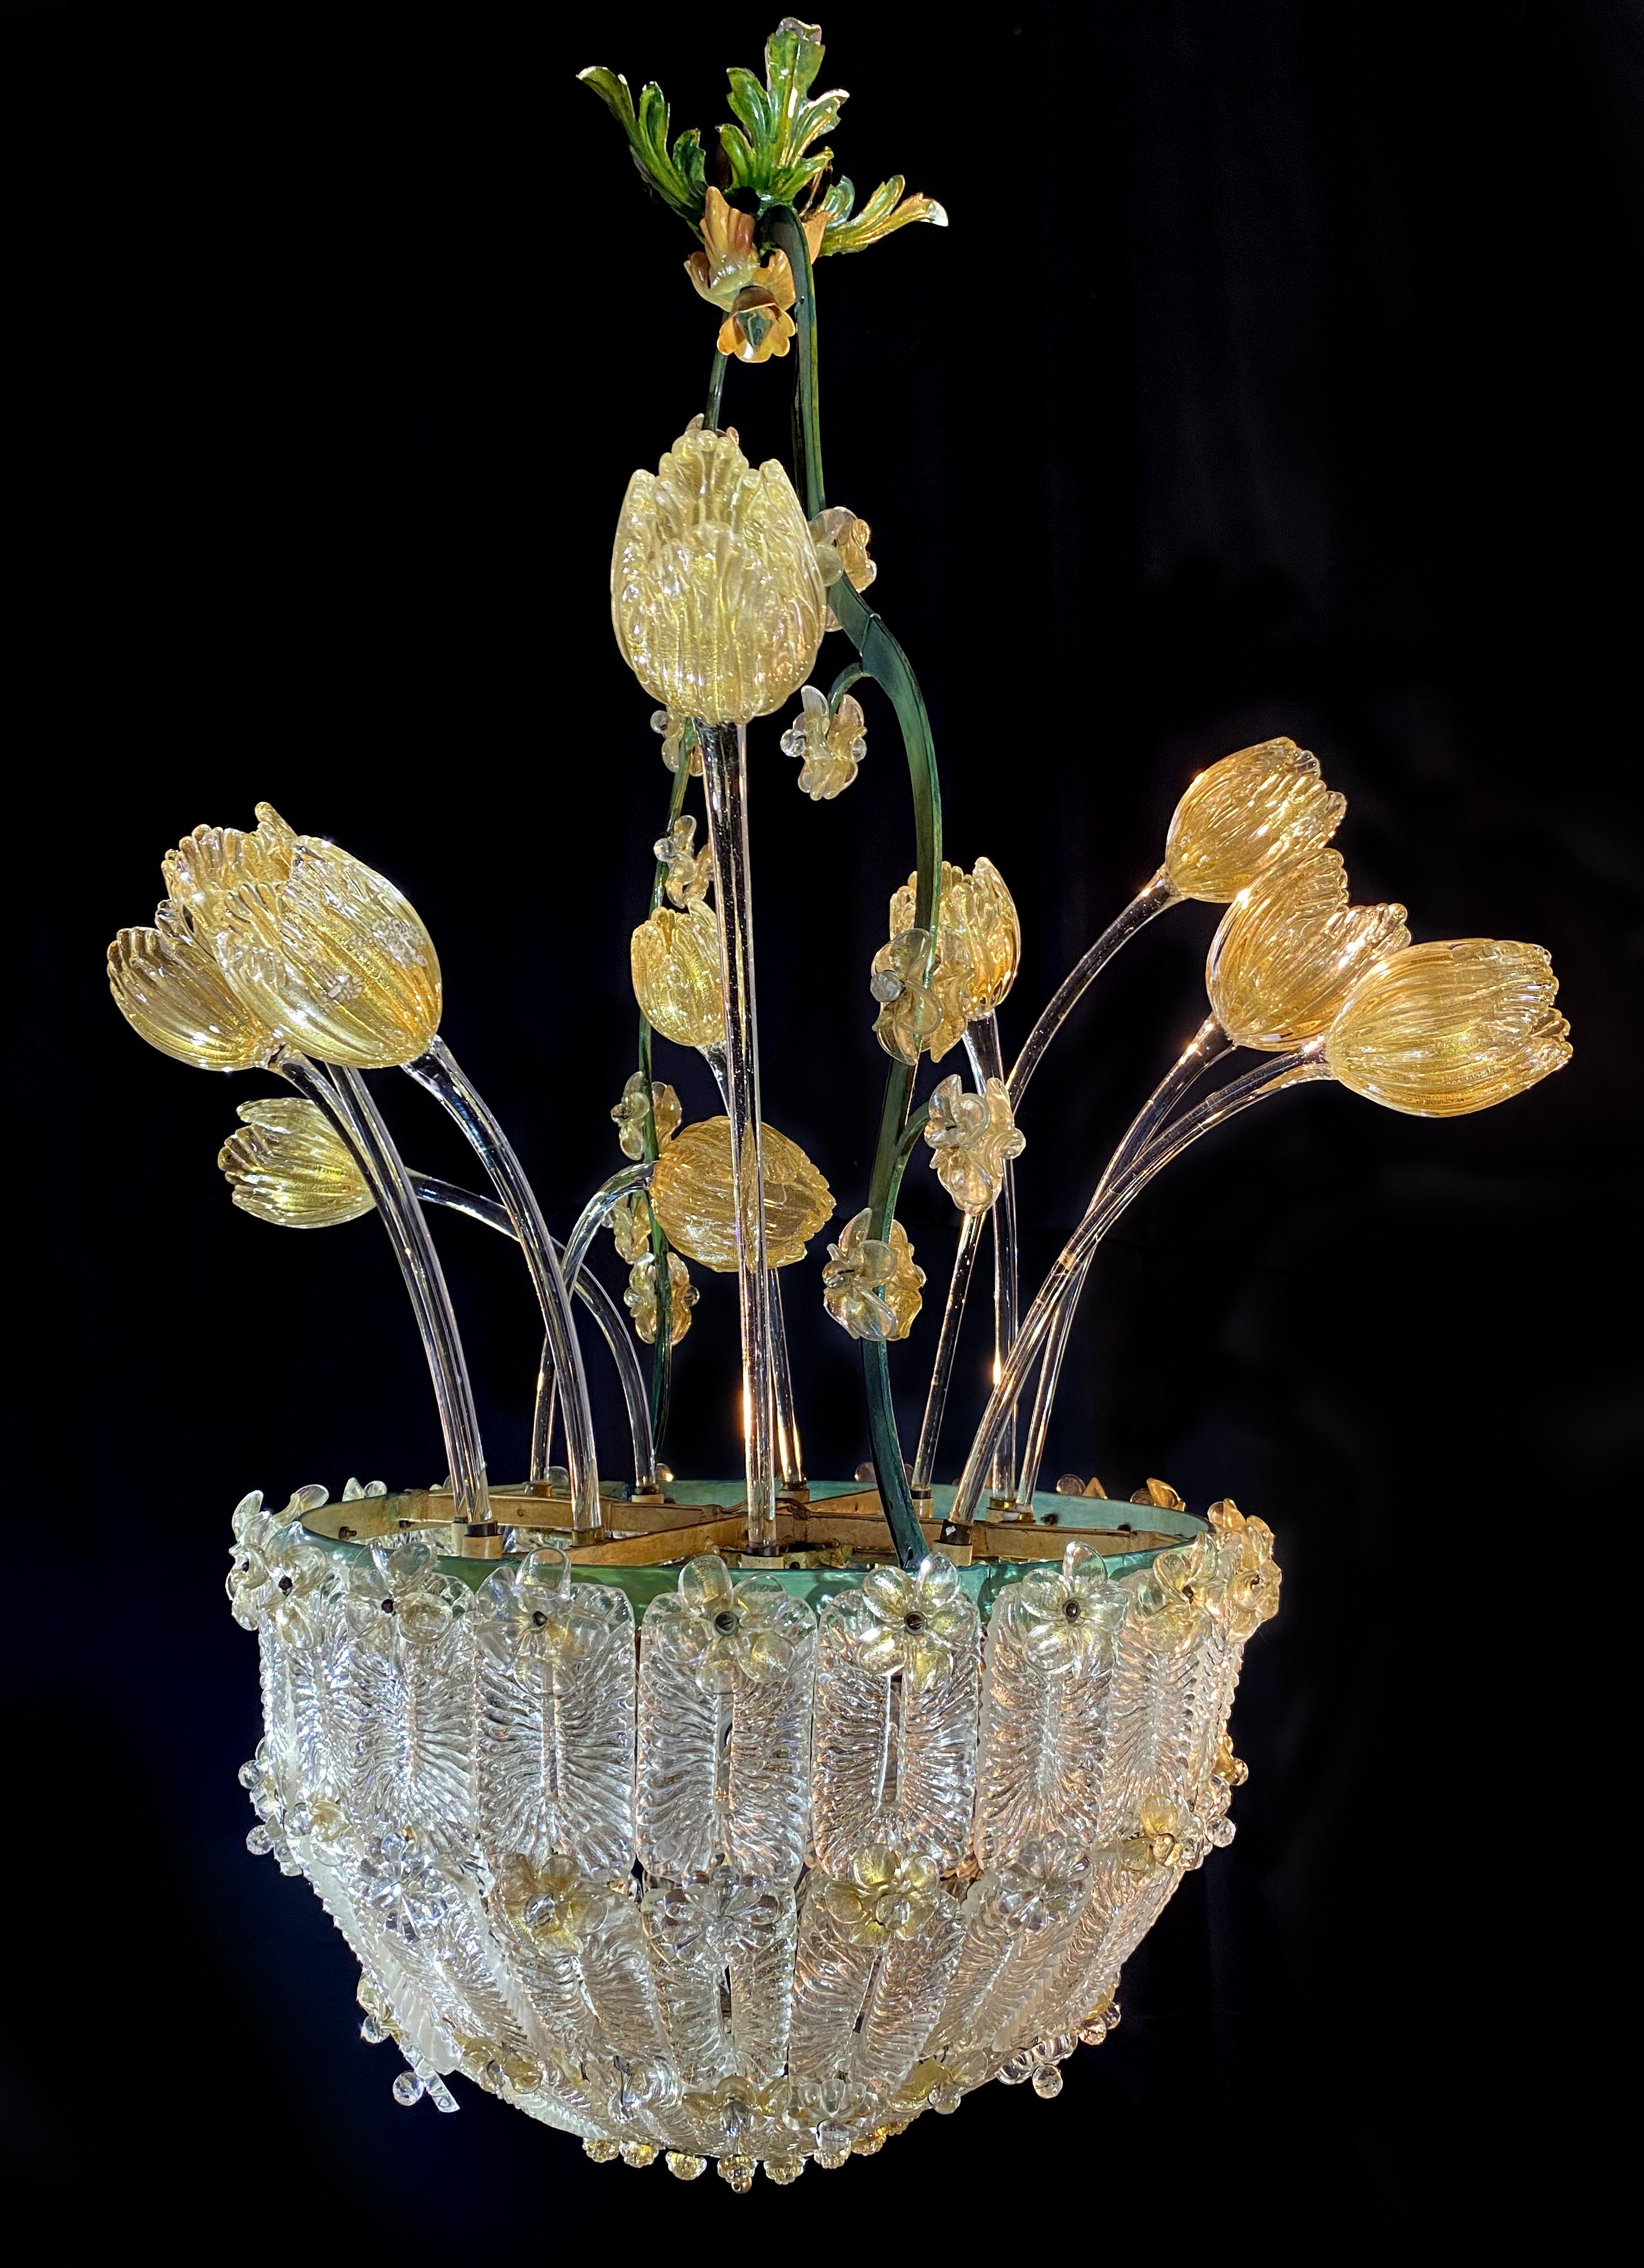 Amazing Glass Flower Chandelier with Gold Inclusions, Murano, 1950s For Sale 11